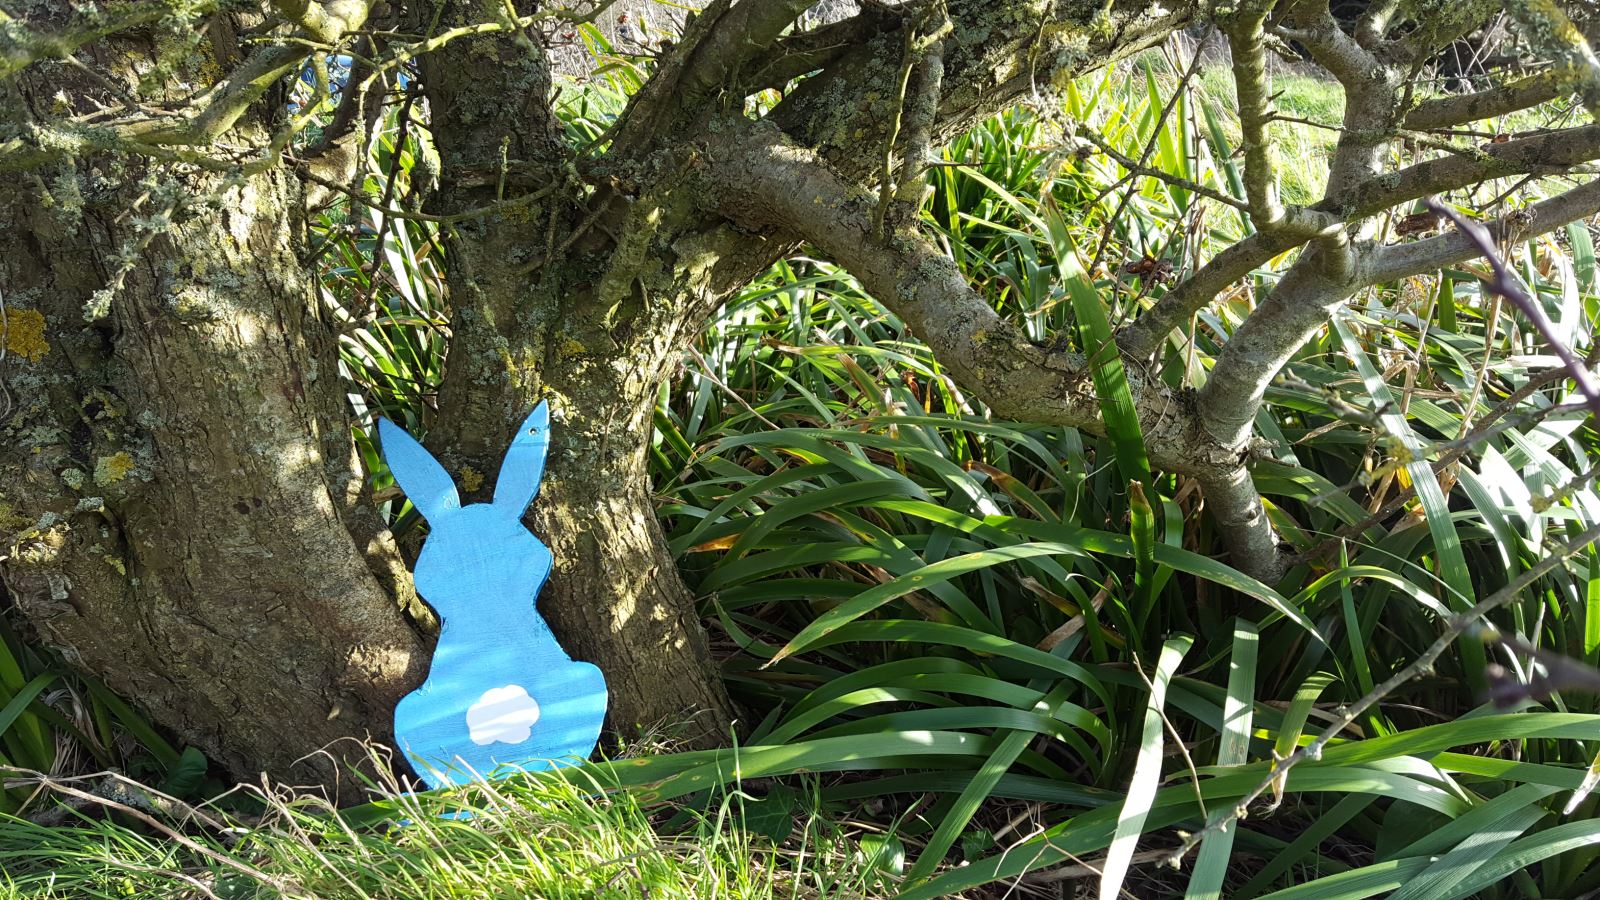 Bonkers Bunnies Childrens Activity Trail 